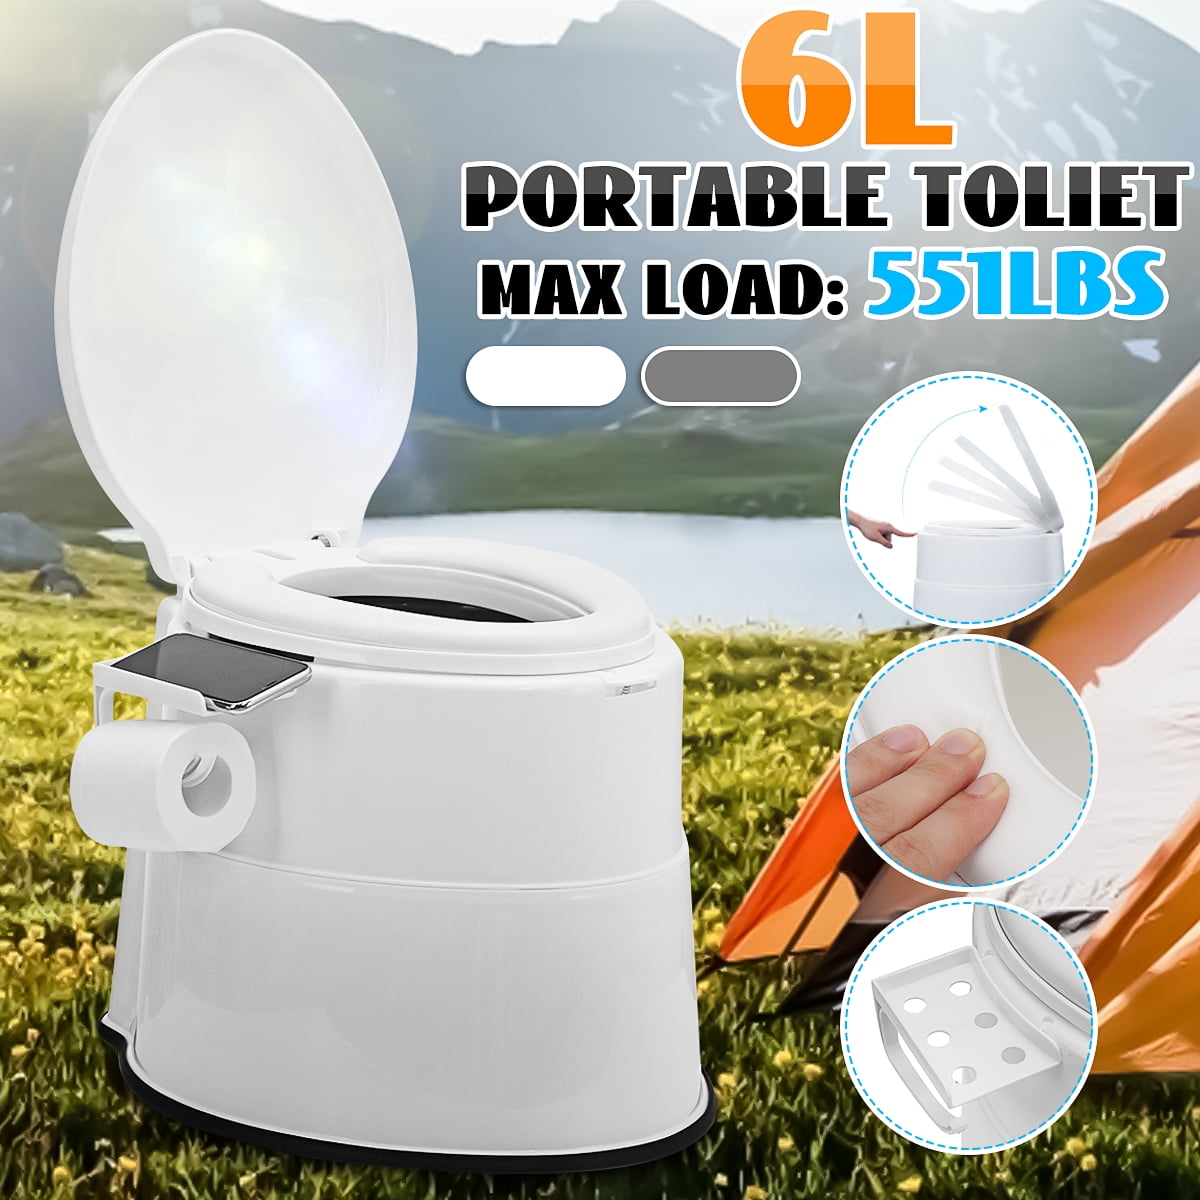 Details about   Portable Camping Traveling Hassock Toilet Easy Clean-up Disposal Paper Holder US 